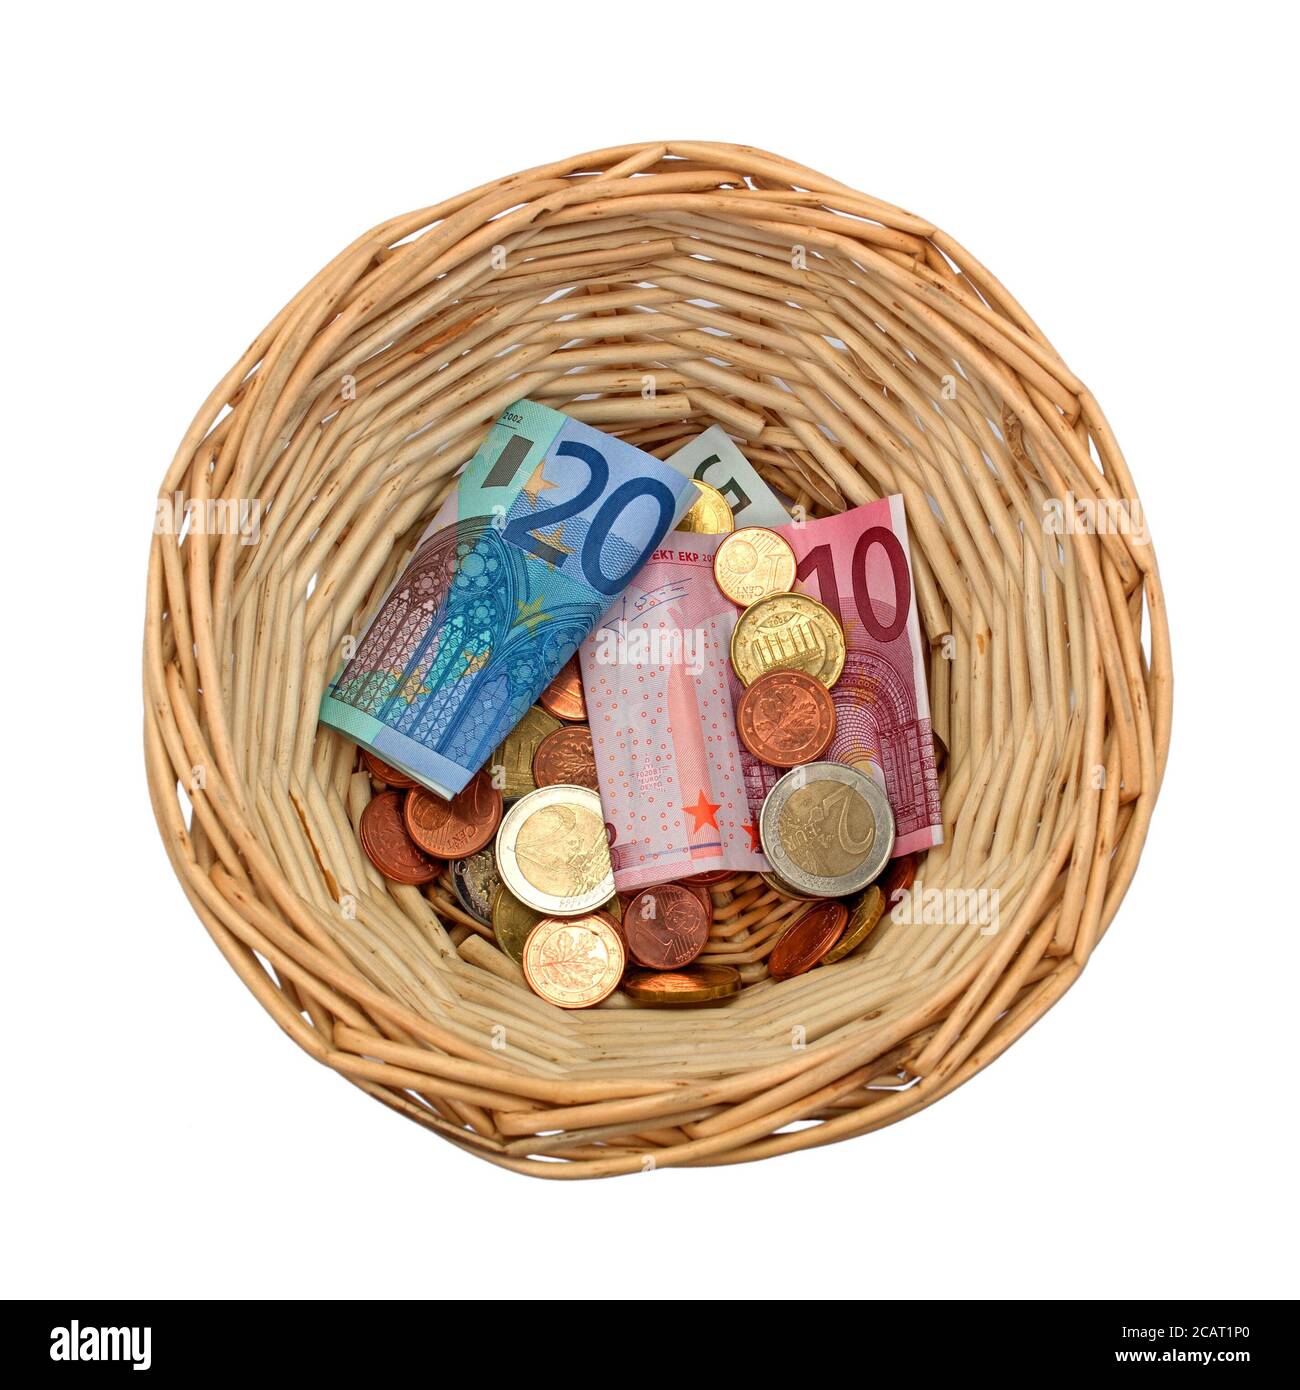 Basket with donation money in front of white background Stock Photo